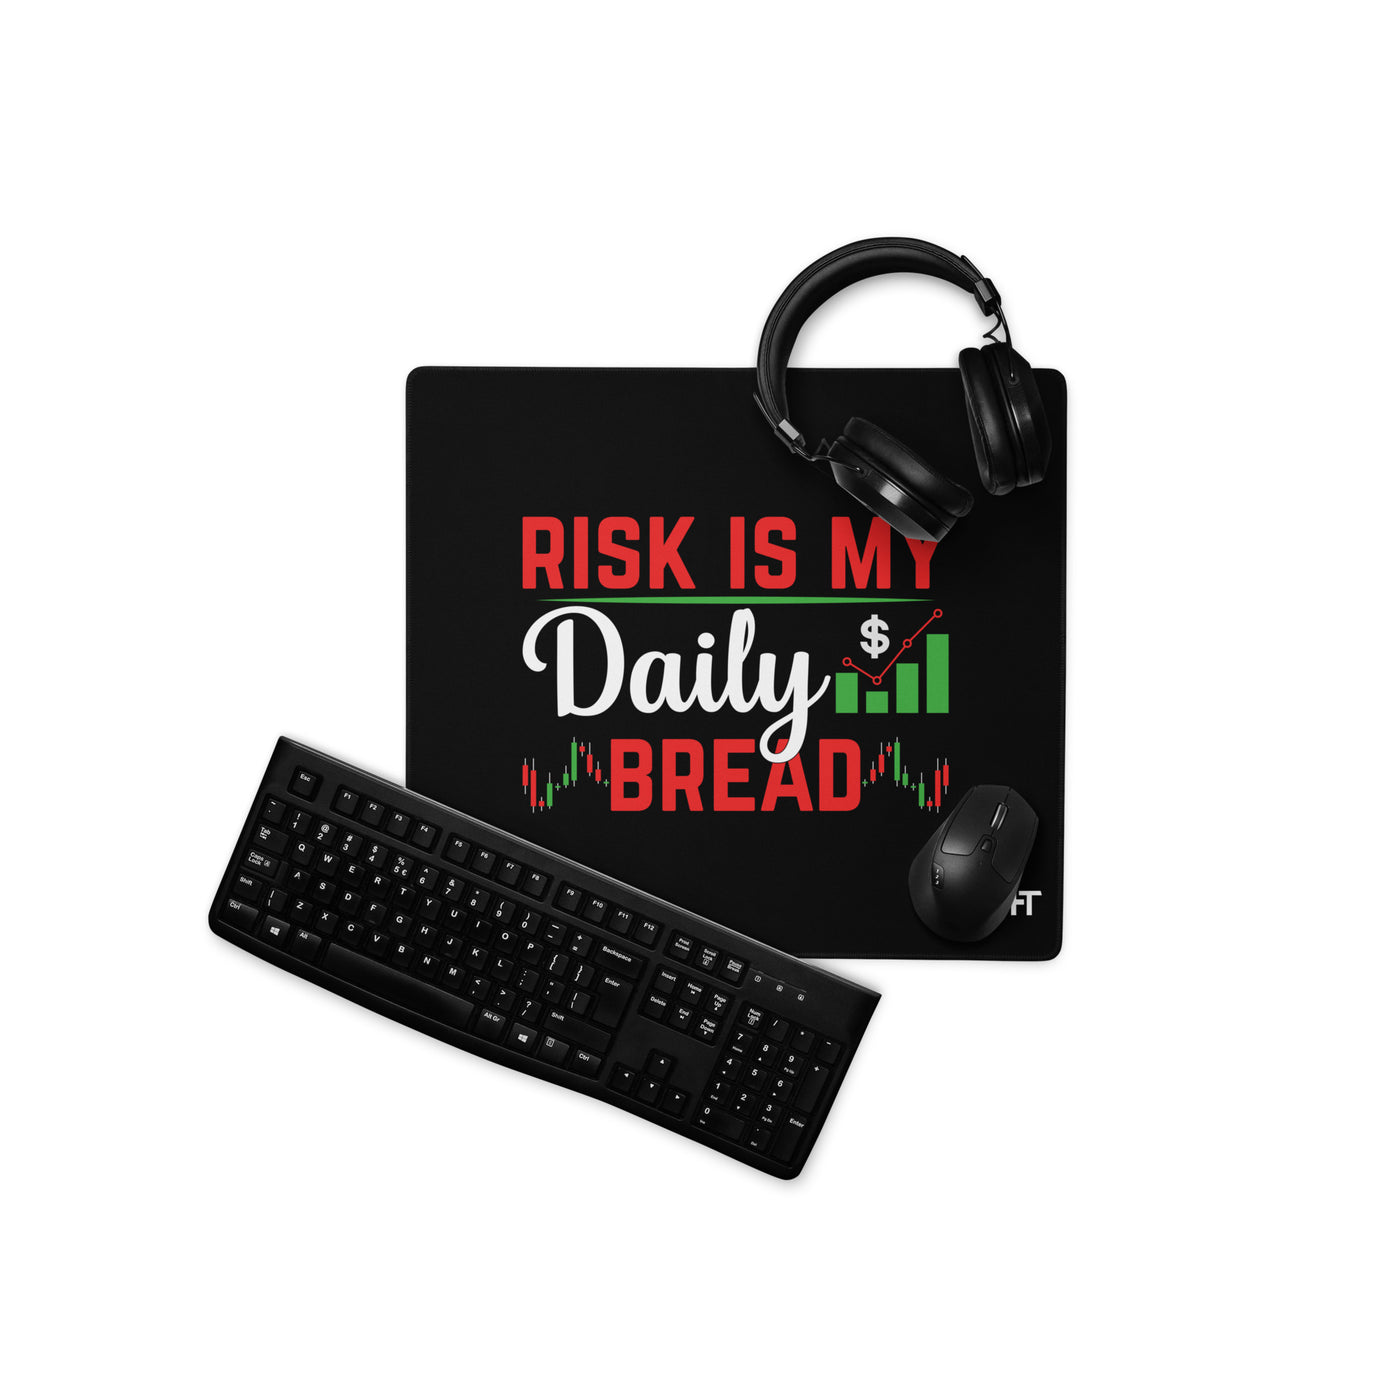 Risk is my Daily Bread - Desk Mat